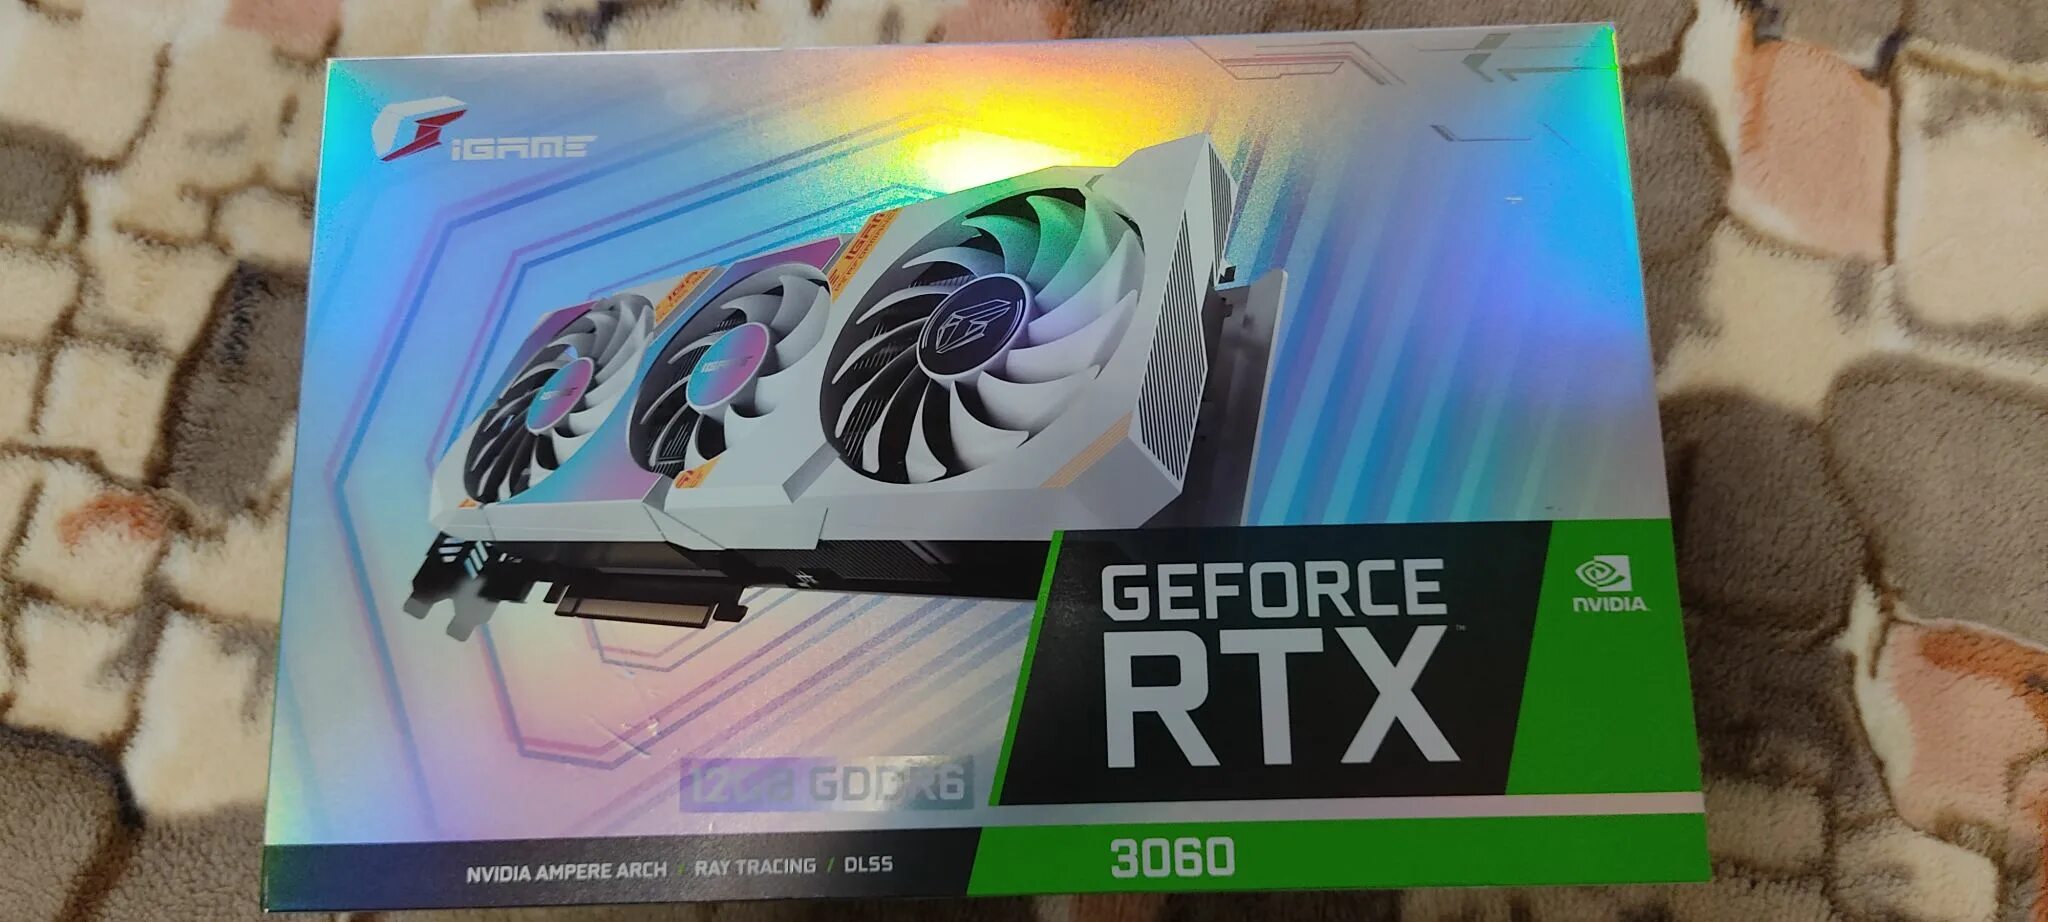 RTX 3060 ультра. Colorful IGAME GEFORCE RTX 3060 Ultra w OC 12g l-v. 3060 Ultra w. Colorful RTX 3060 Ultra w OC. Colorful 3060 12g ultra w